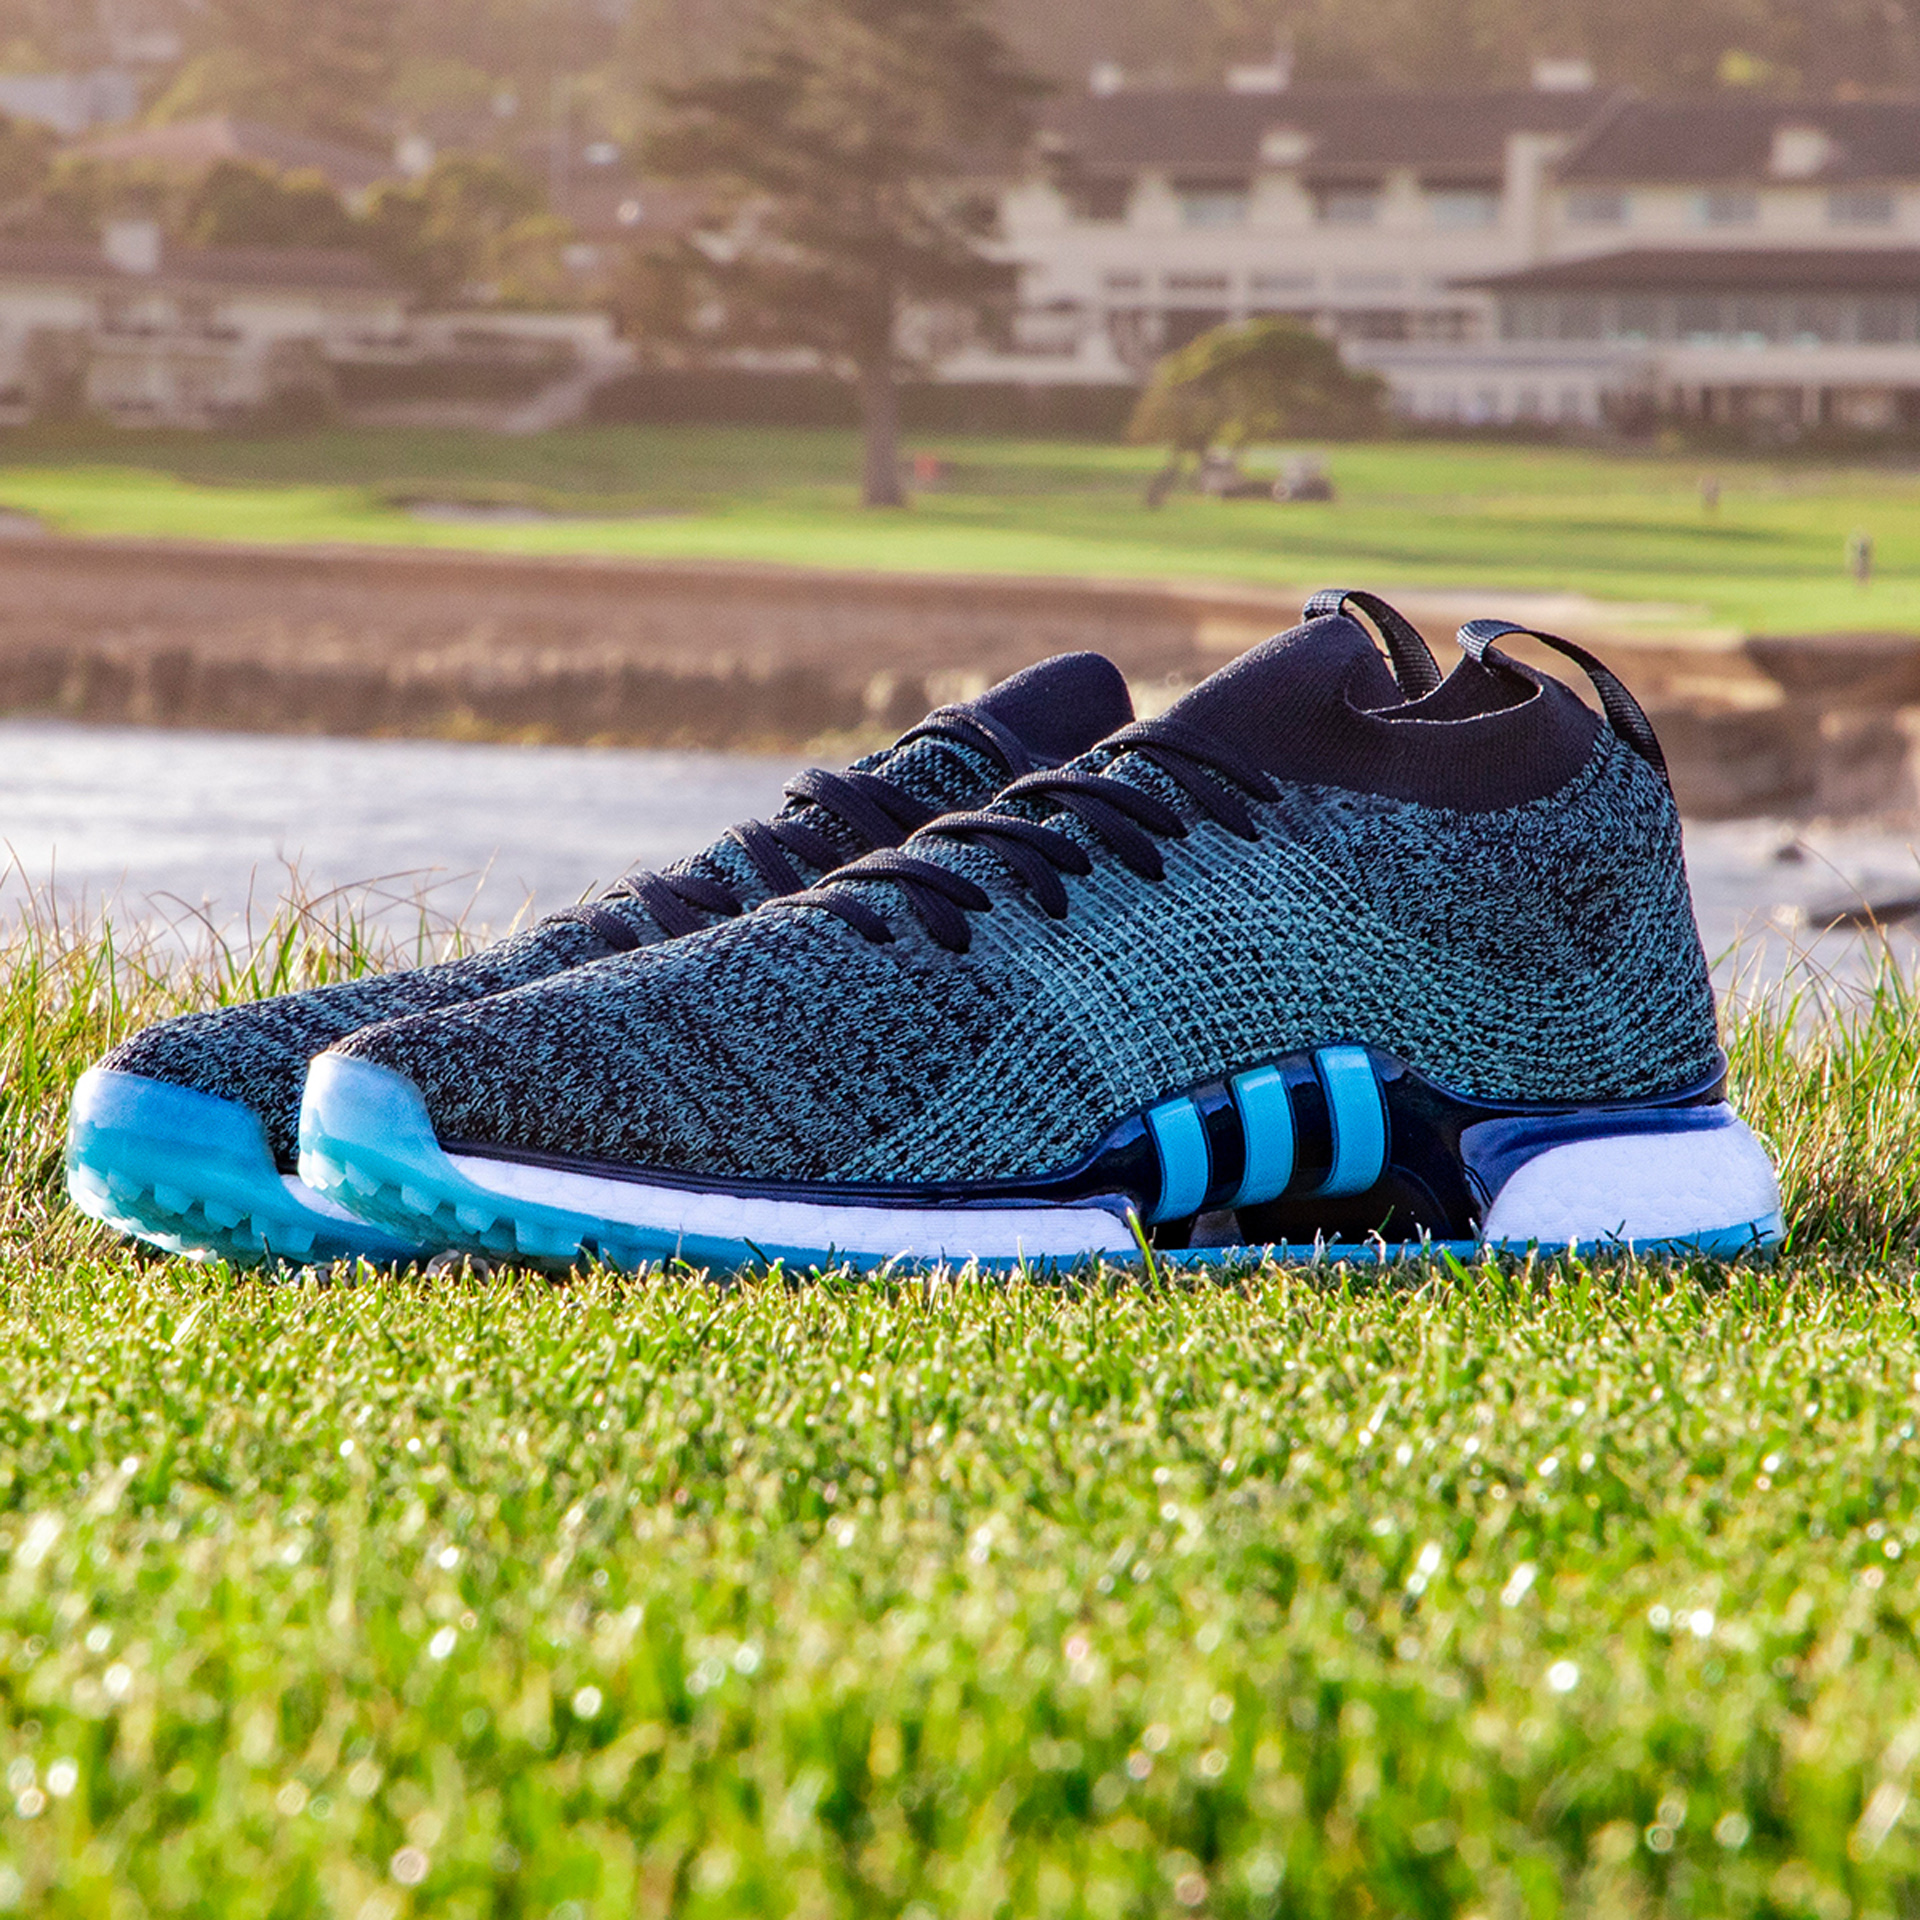 adidas nmd golf shoes